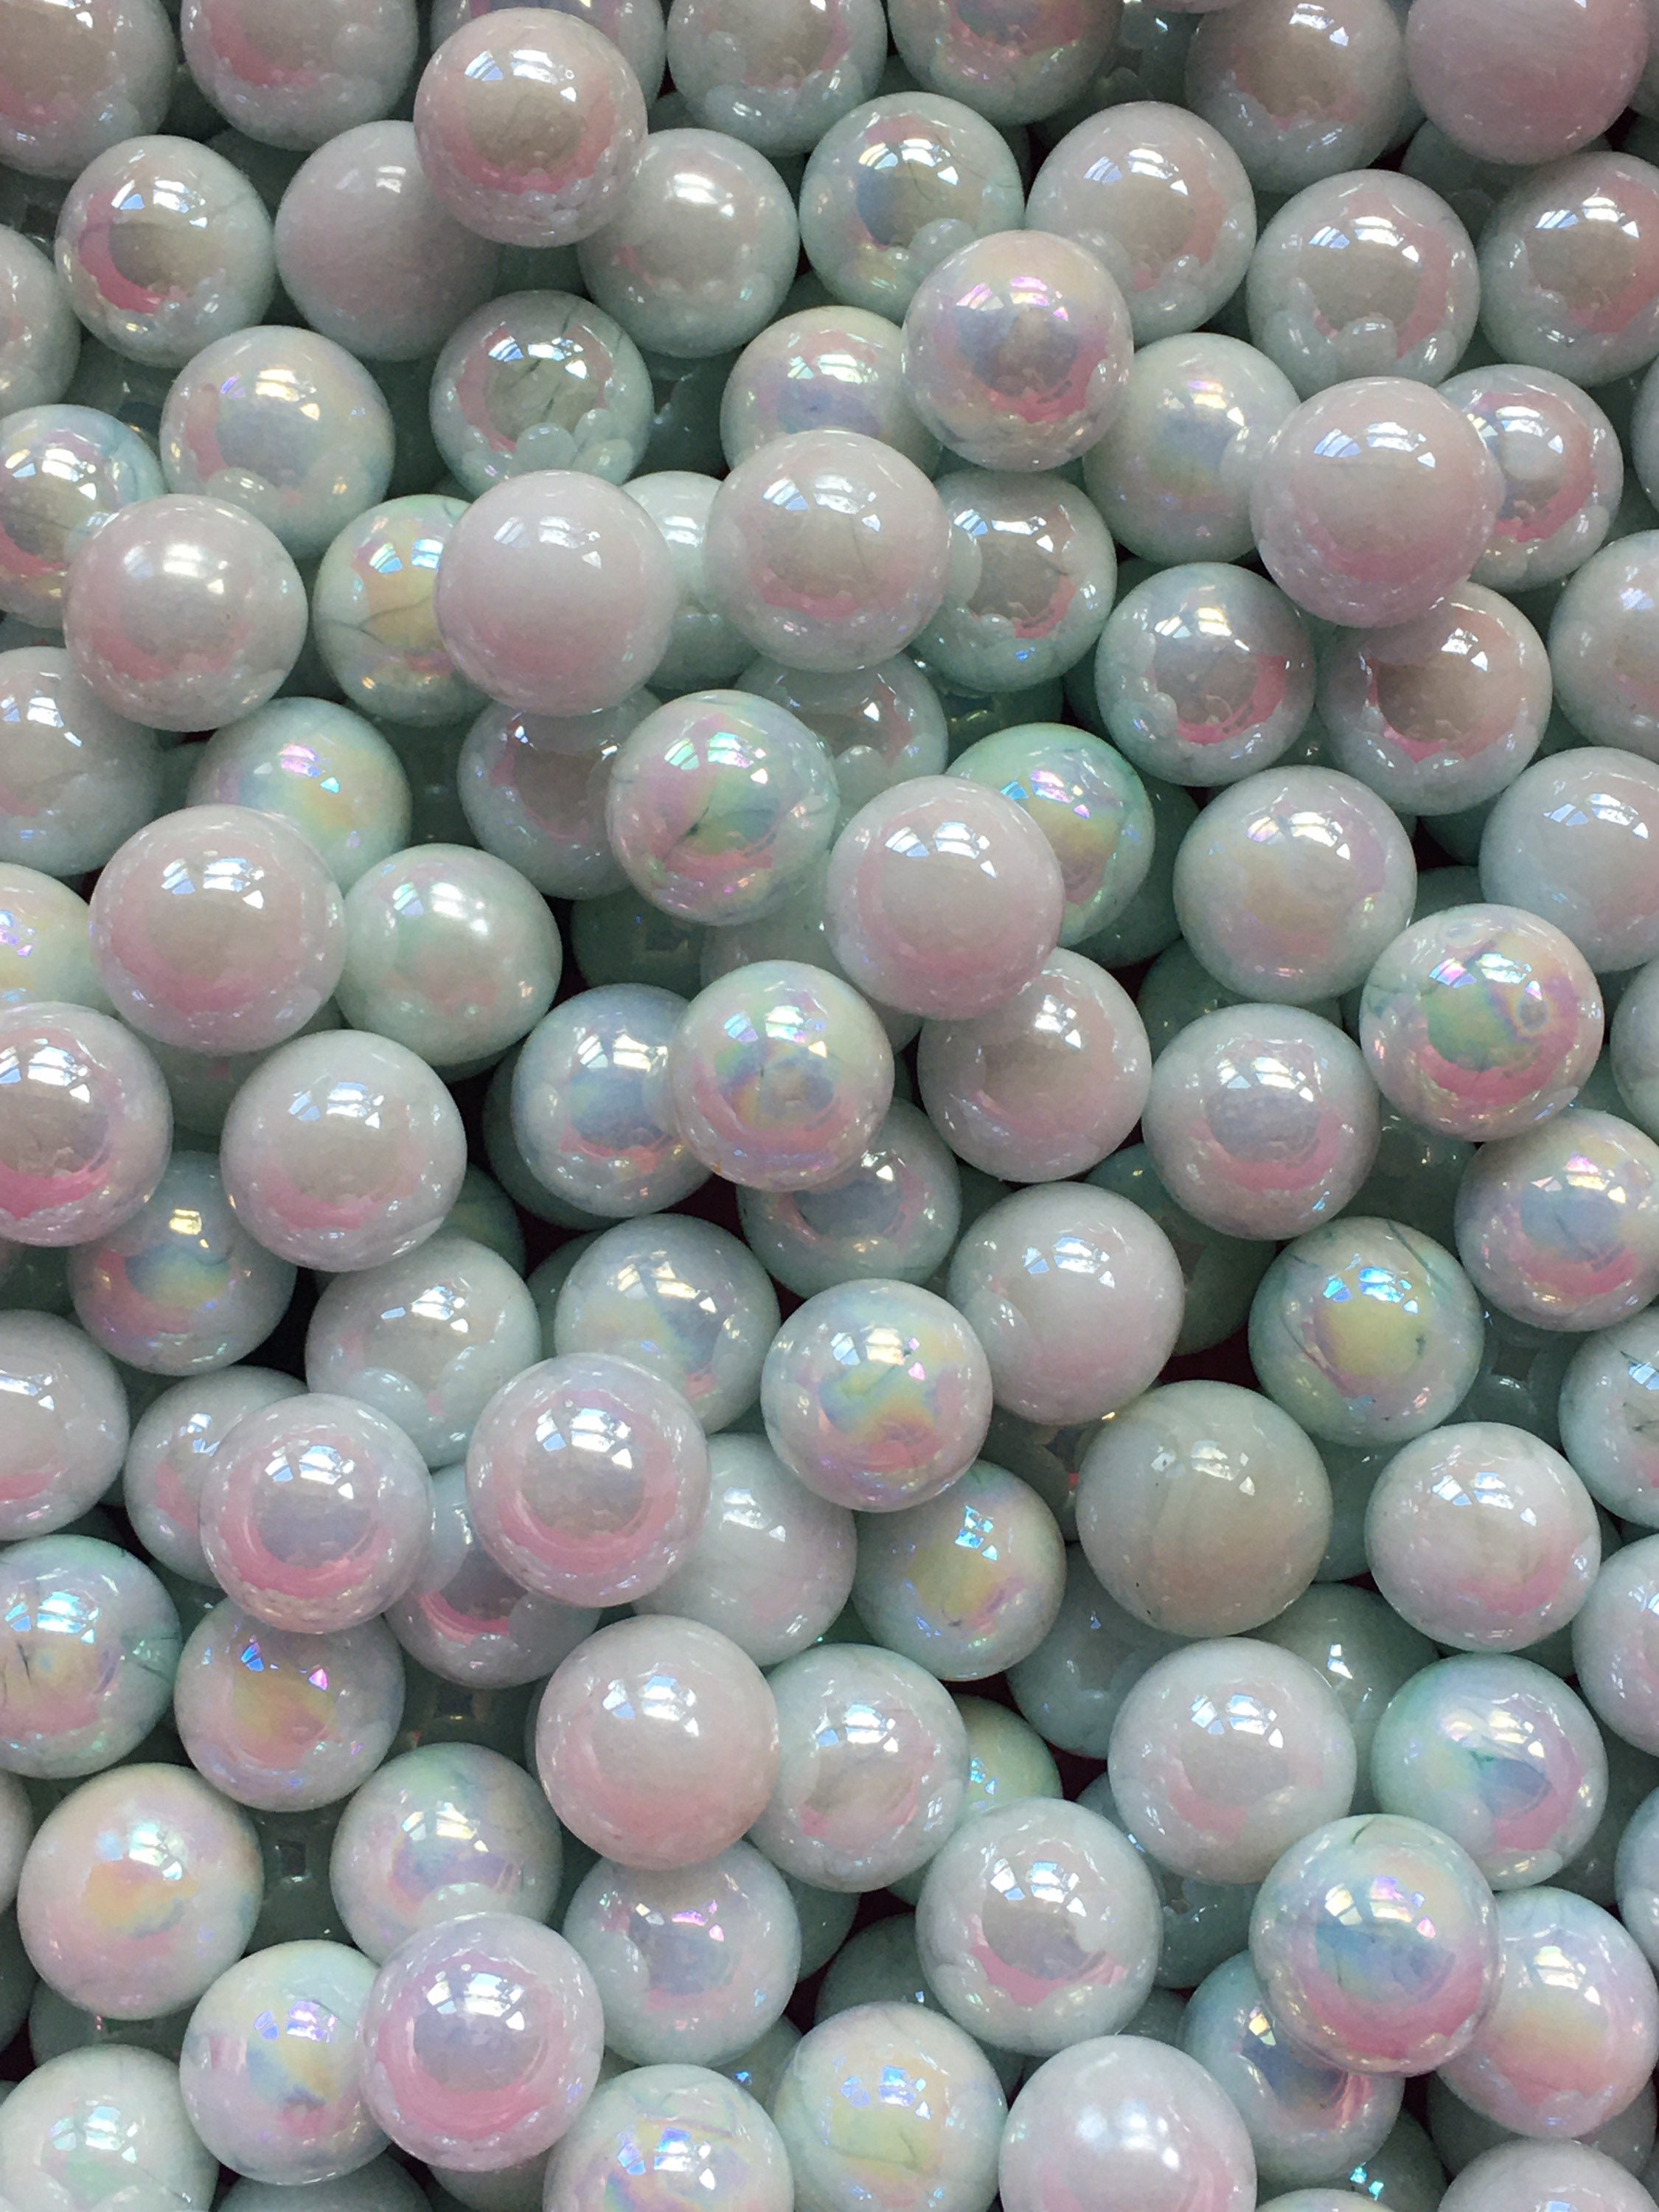 + or - 50 CHAMPION 9/16" LUSTER PEARL WHITE MARBLES   $4.99 